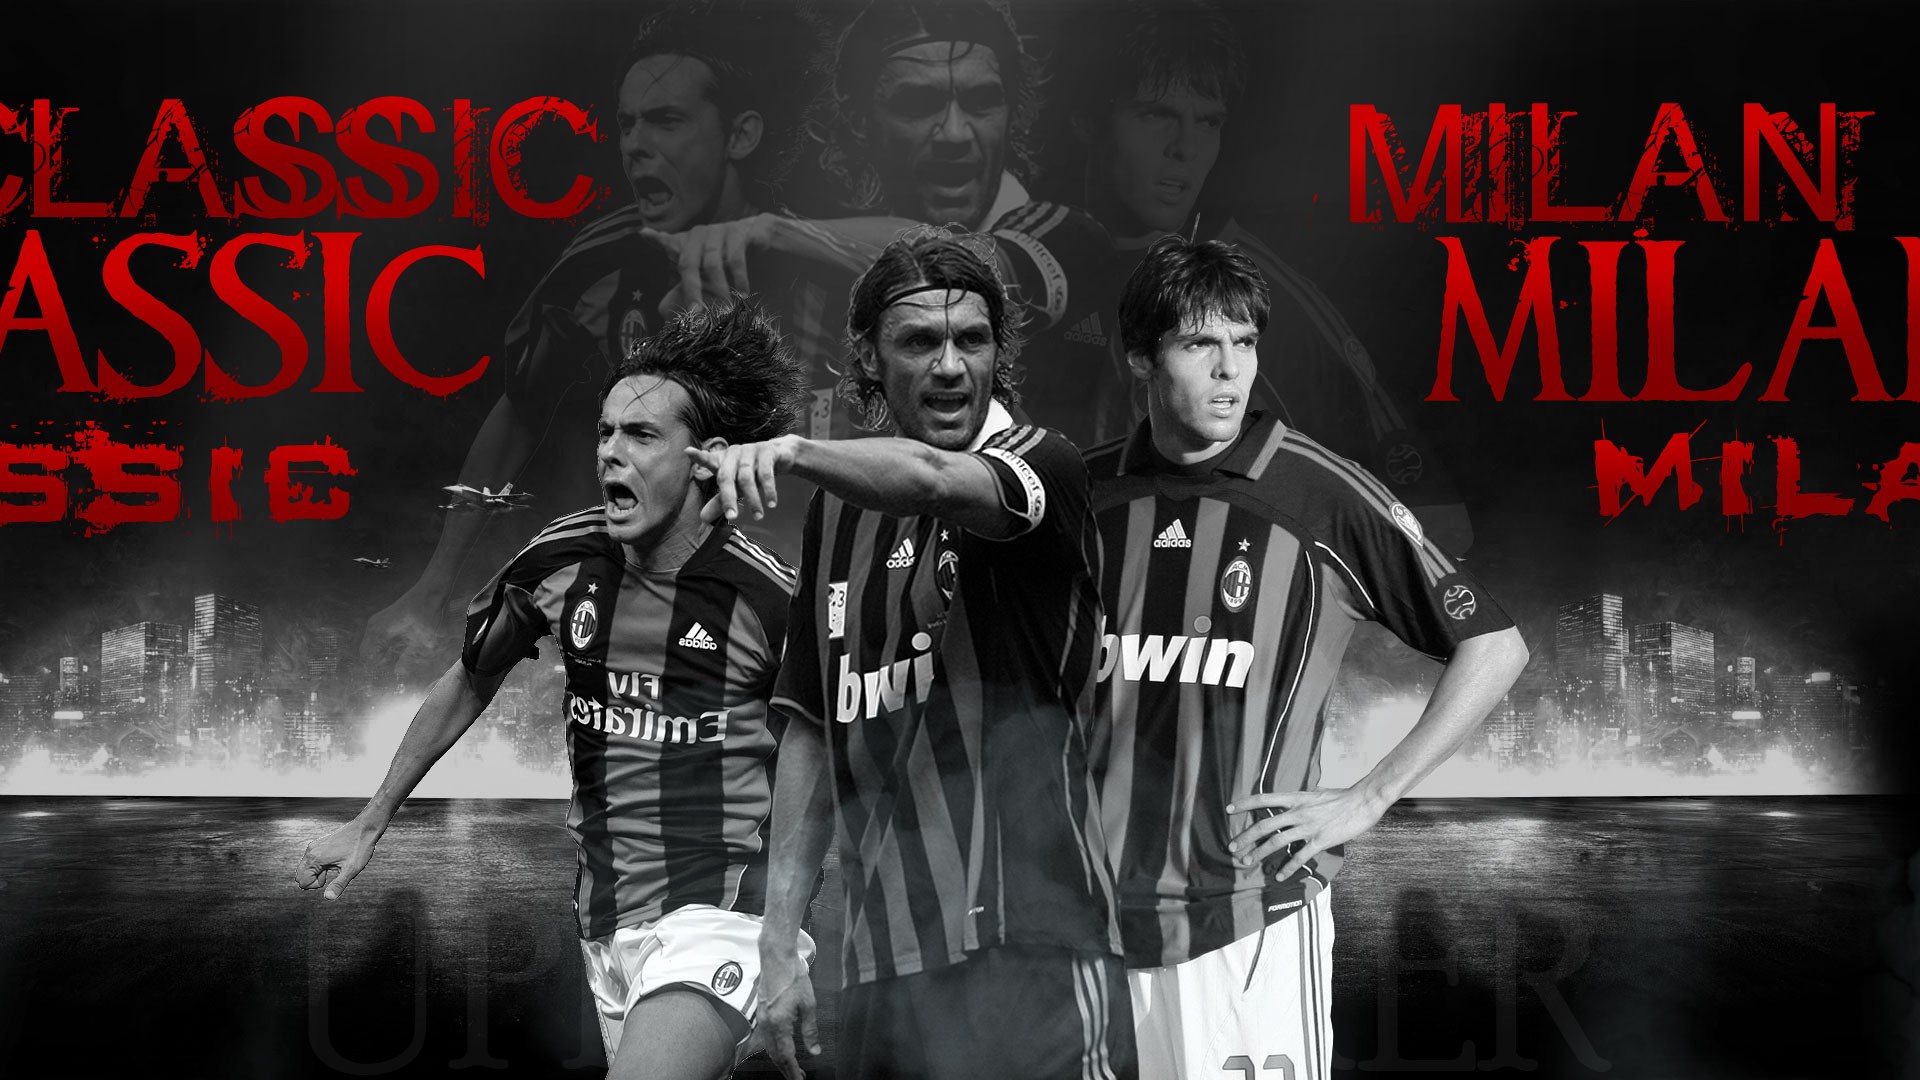 Wallpapers HD AC Milan Legends With high-resolution 1920X1080 pixel. You can use this wallpaper for your Desktop Computers, Mac Screensavers, Windows Backgrounds, iPhone Wallpapers, Tablet or Android Lock screen and another Mobile device